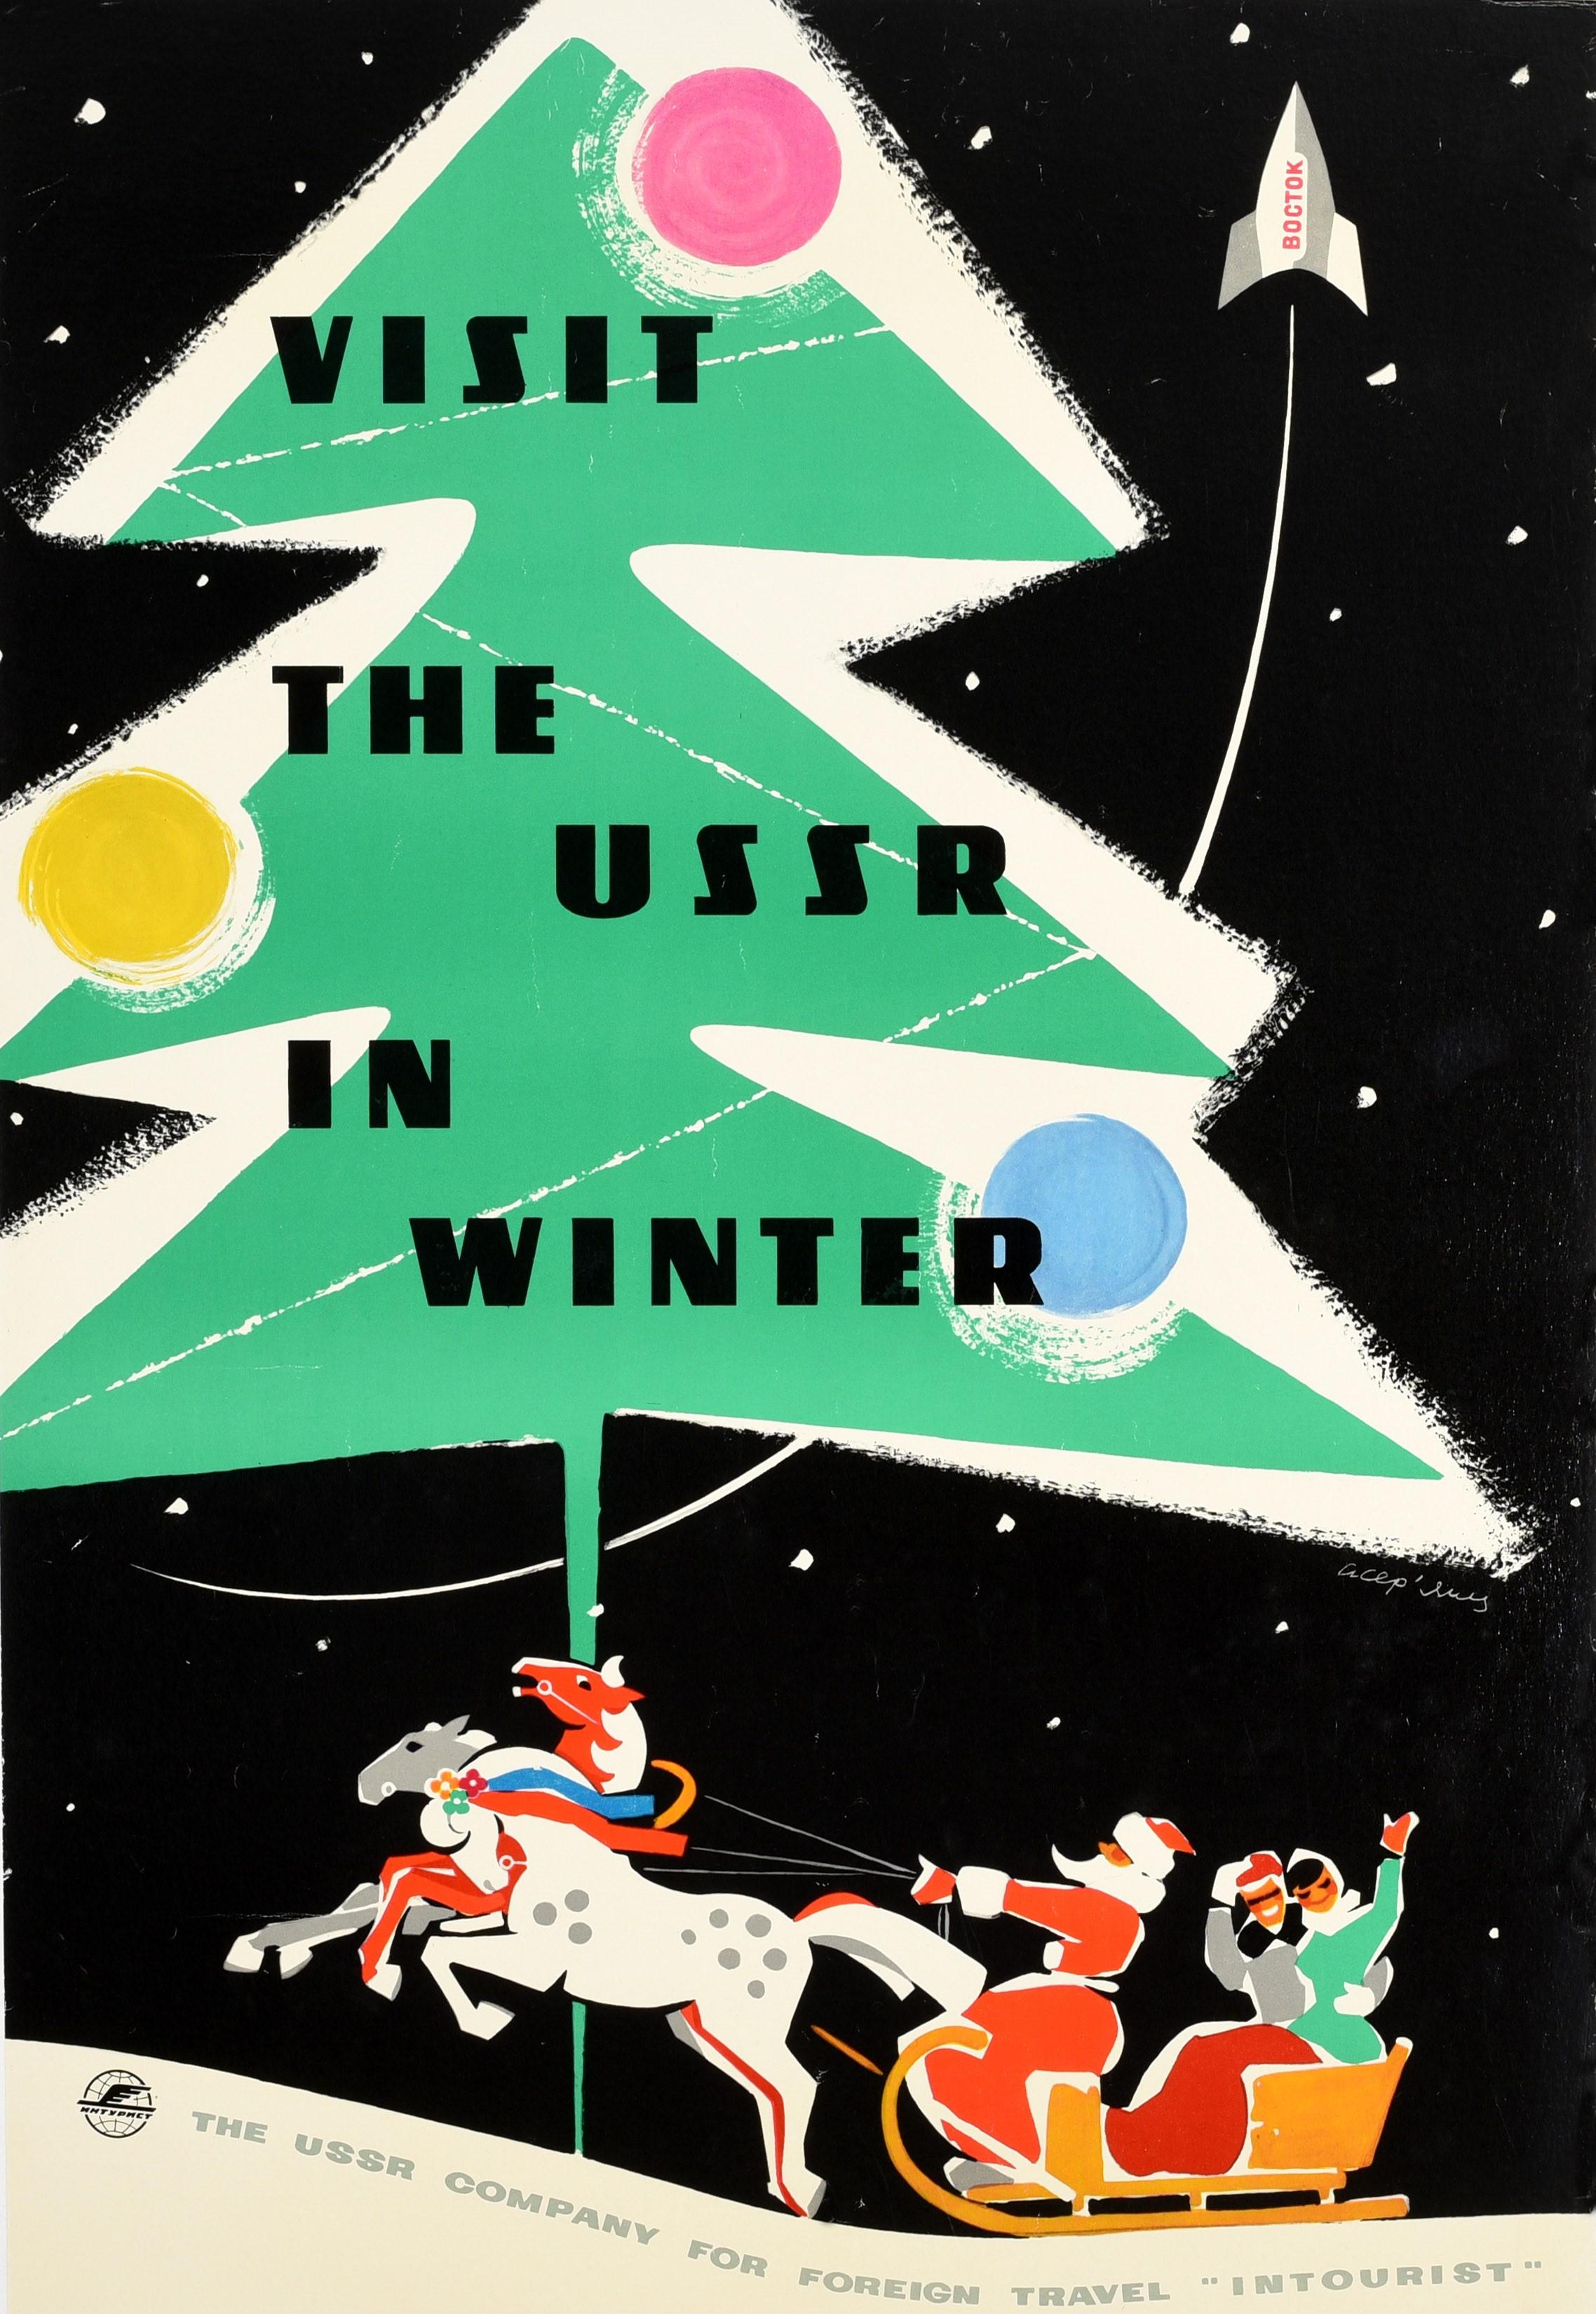 Original vintage Soviet travel poster issued by The USSR Company for Foreign Travel Intourist - Visit the USSR in Winter - featuring a fun and colourful design depicting a Vostok space rocket shooting into the night sky above a Christmas / New Year